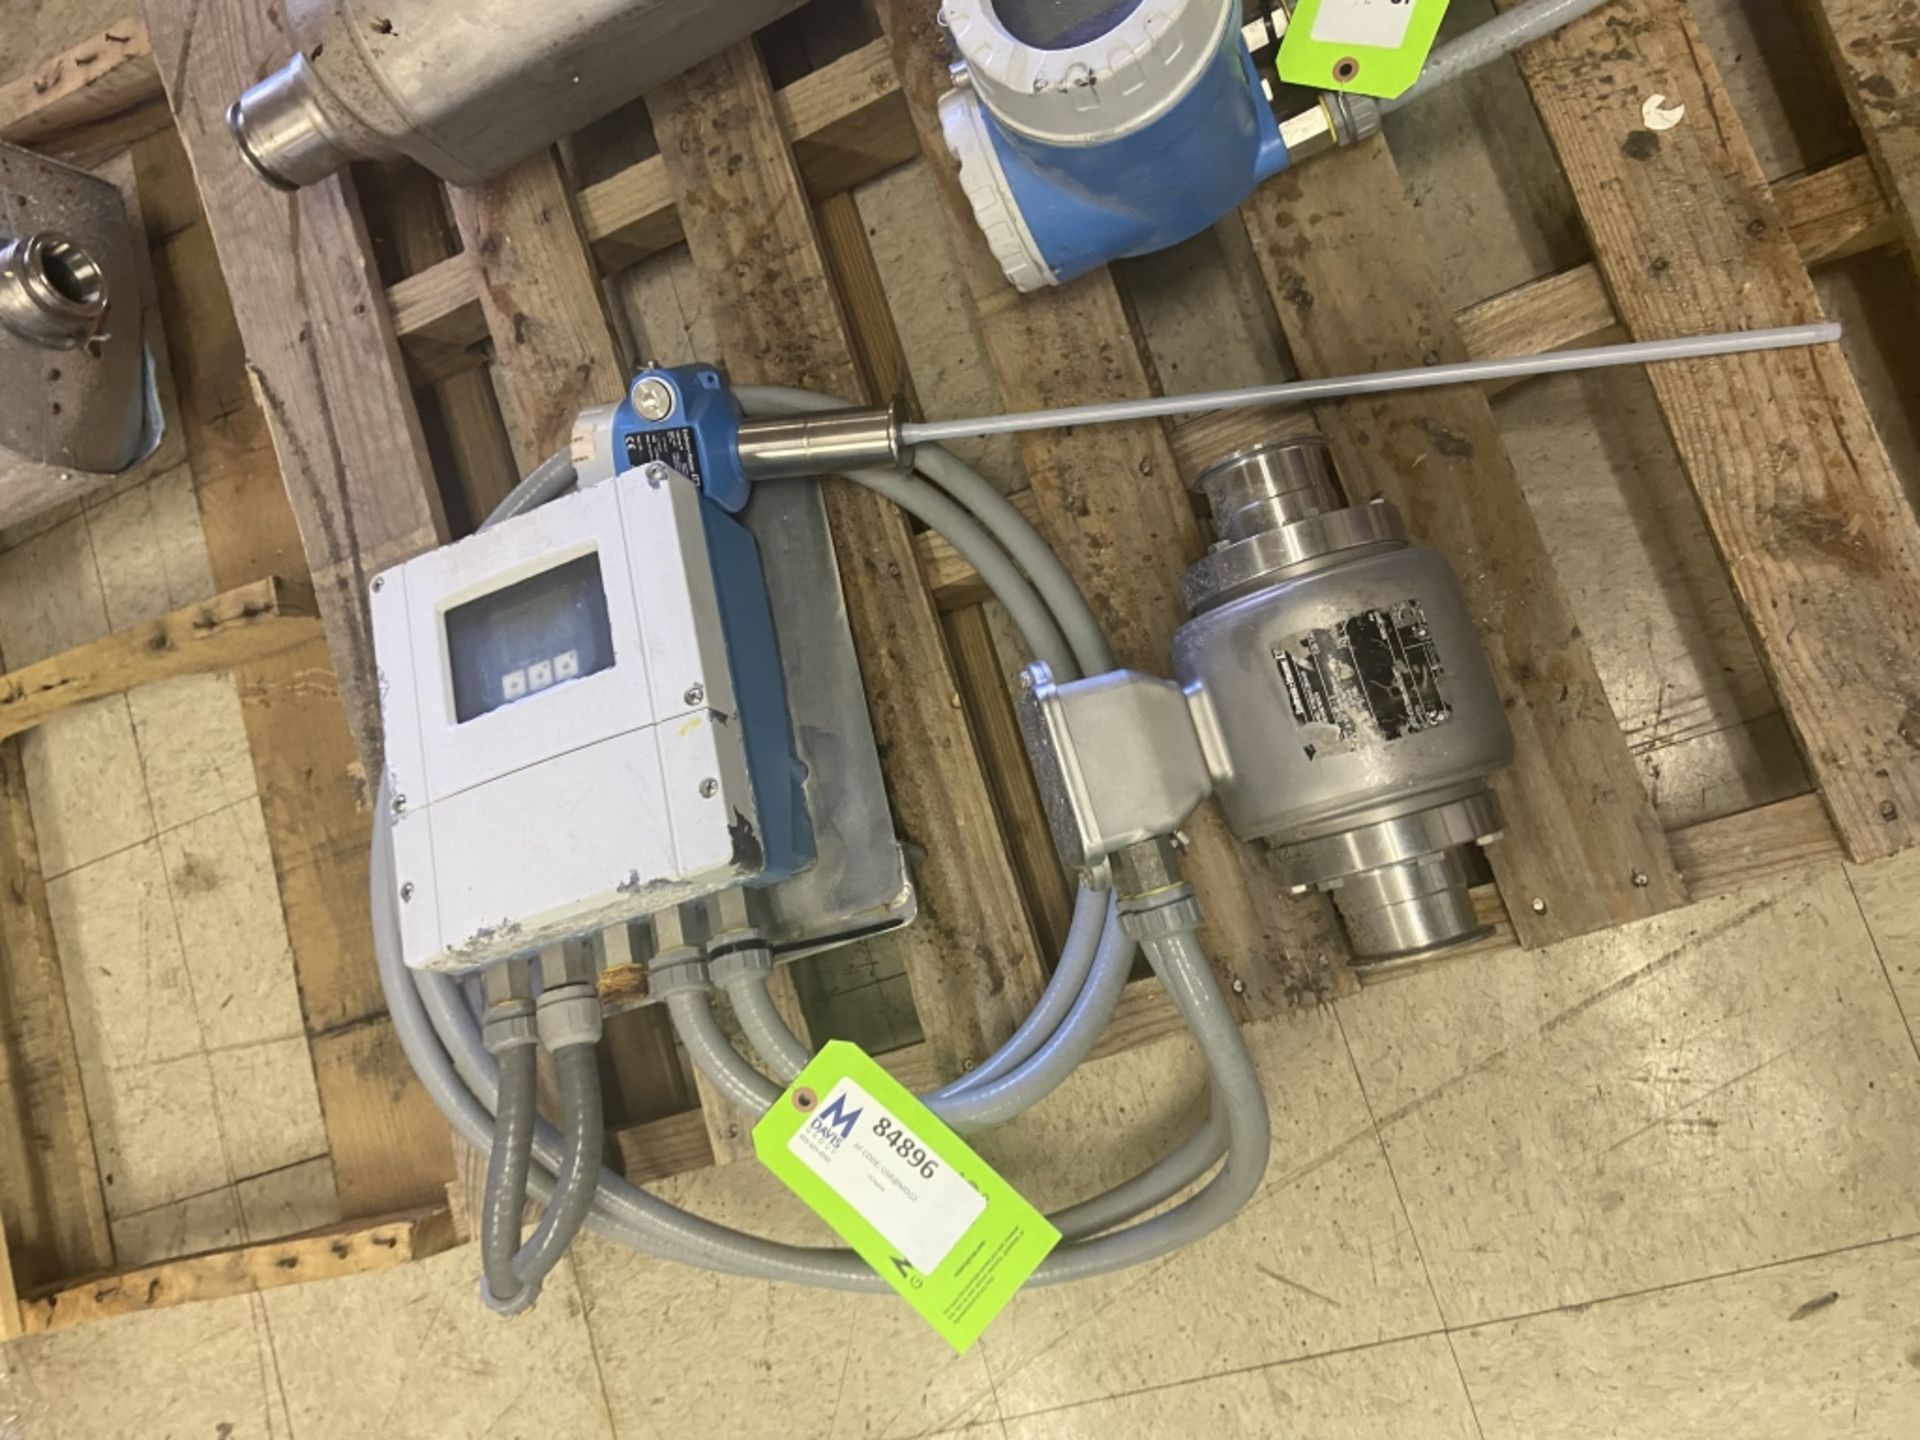 Endress + Hauser Flow Meter with Endress + Hauser Tank Leveler, with Aprox. 2-1/2" Clamp Type - Image 3 of 3